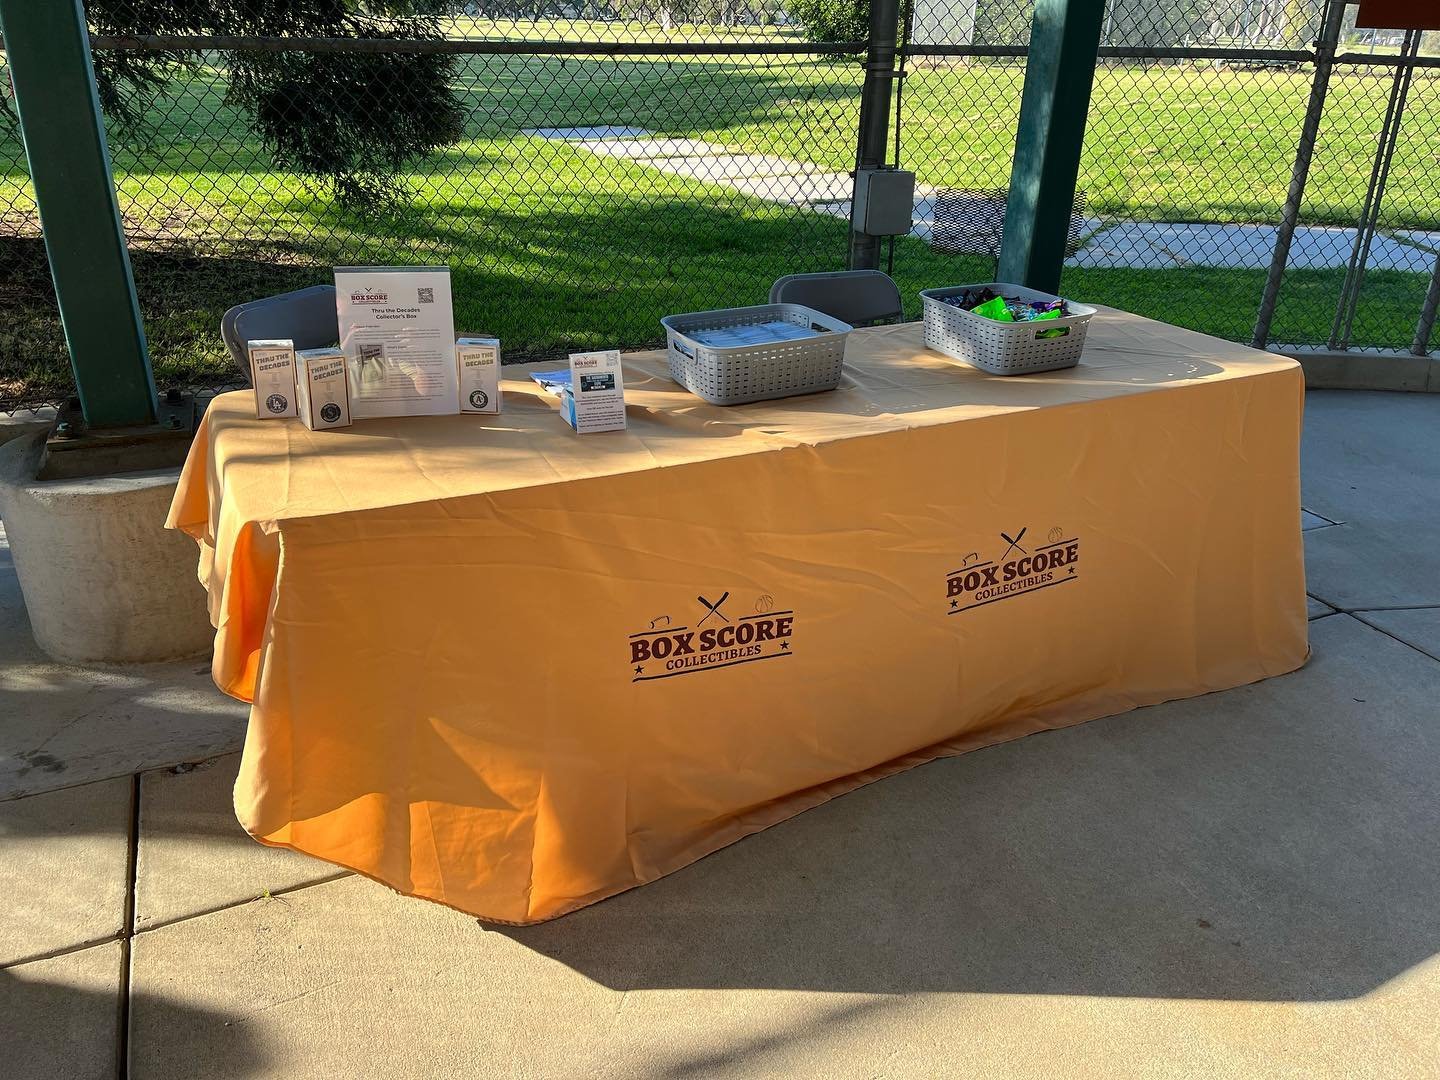 We are set up for tonight&rsquo;s event at the @modestonuts! Let&rsquo;s giveaway some cards and start the new generation of collectors! #collect #BoxScore #CardsForKids